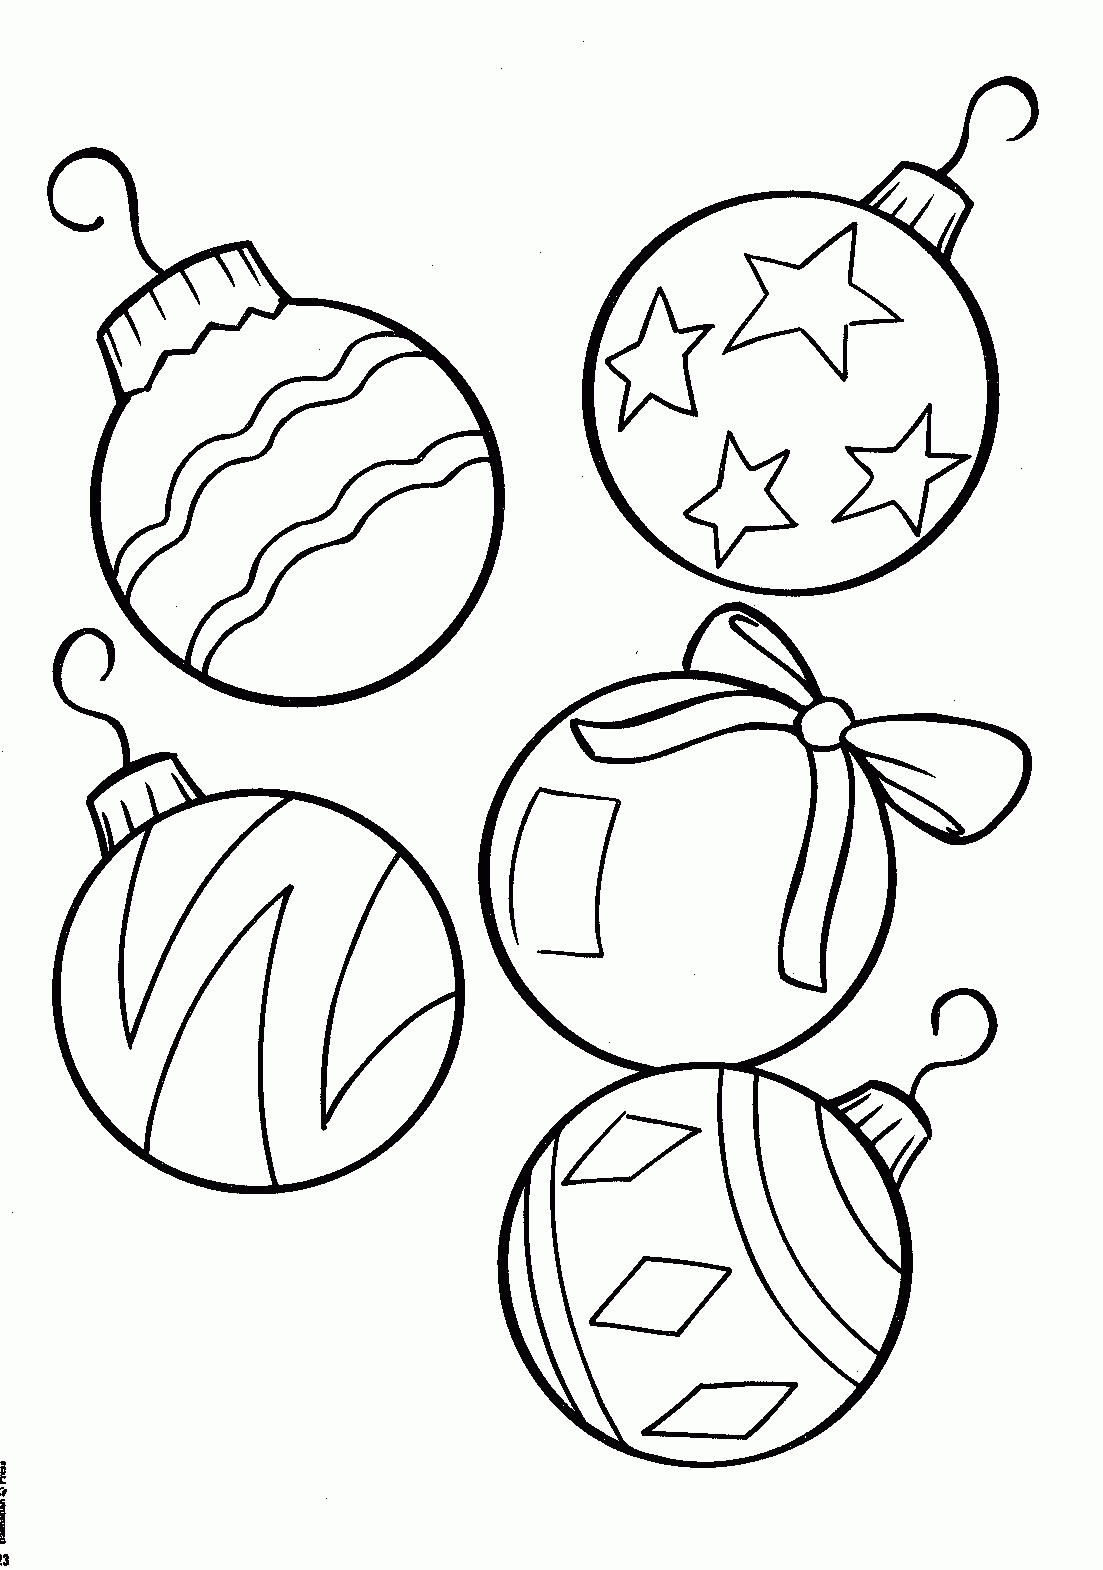 Coloring ~ Coloring Christmas Ornament Color Pages Free Printable - Free Printable Christmas Tree Ornaments Coloring Pages